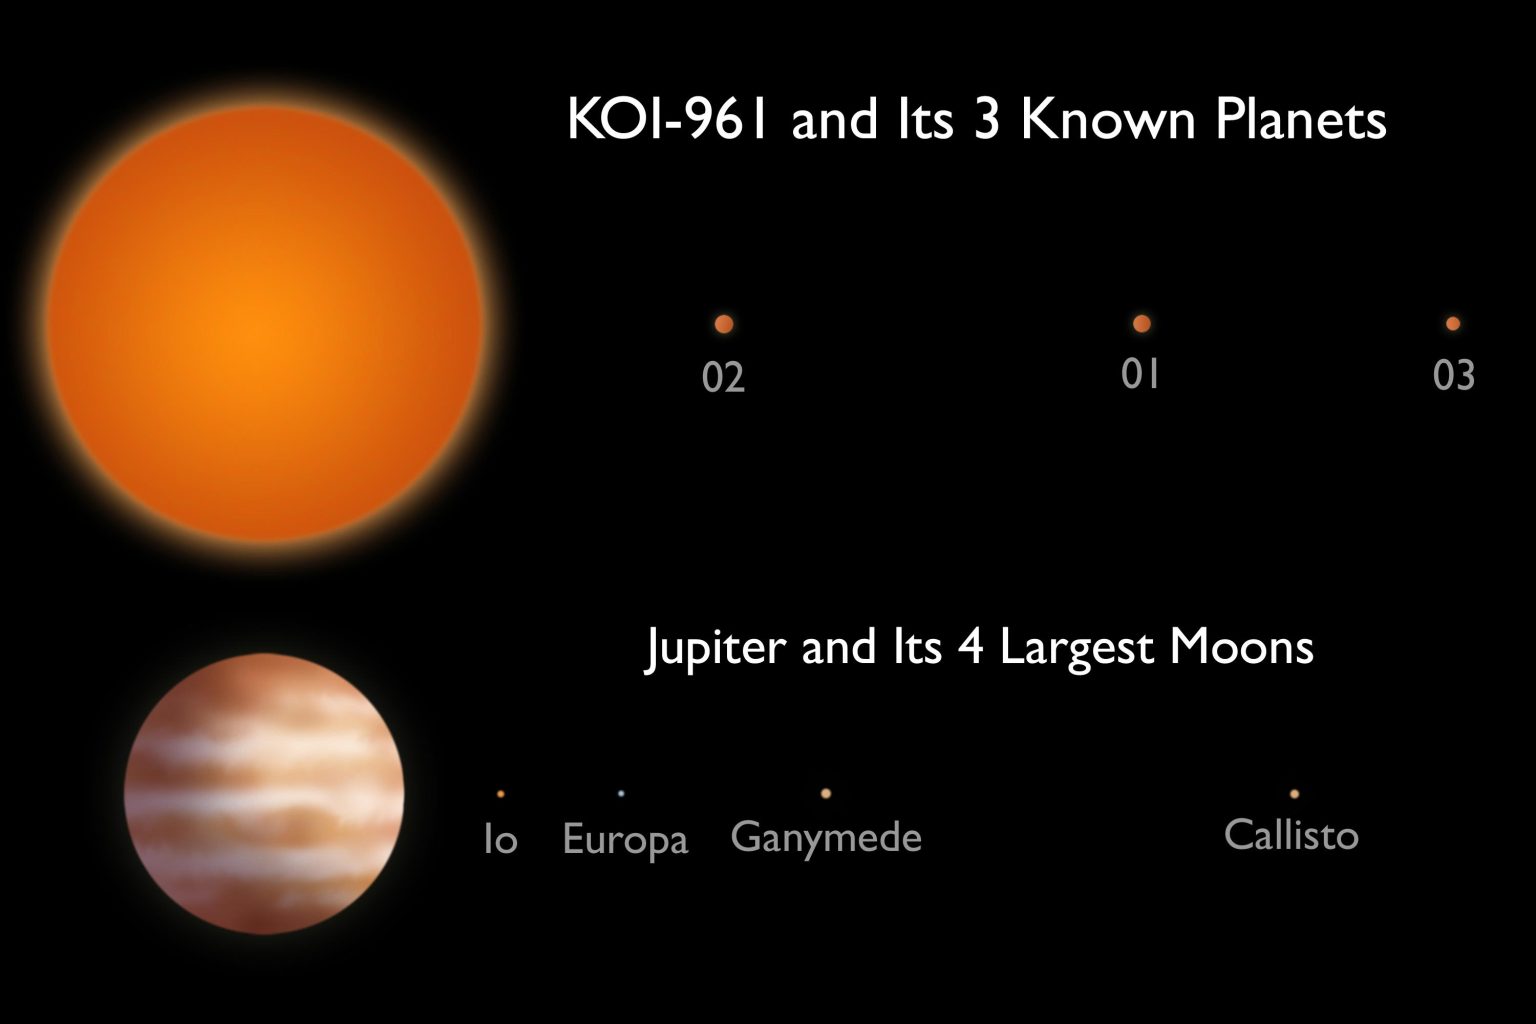 Three Smallest Exoplanets Found by NASA Kepler Astronomers